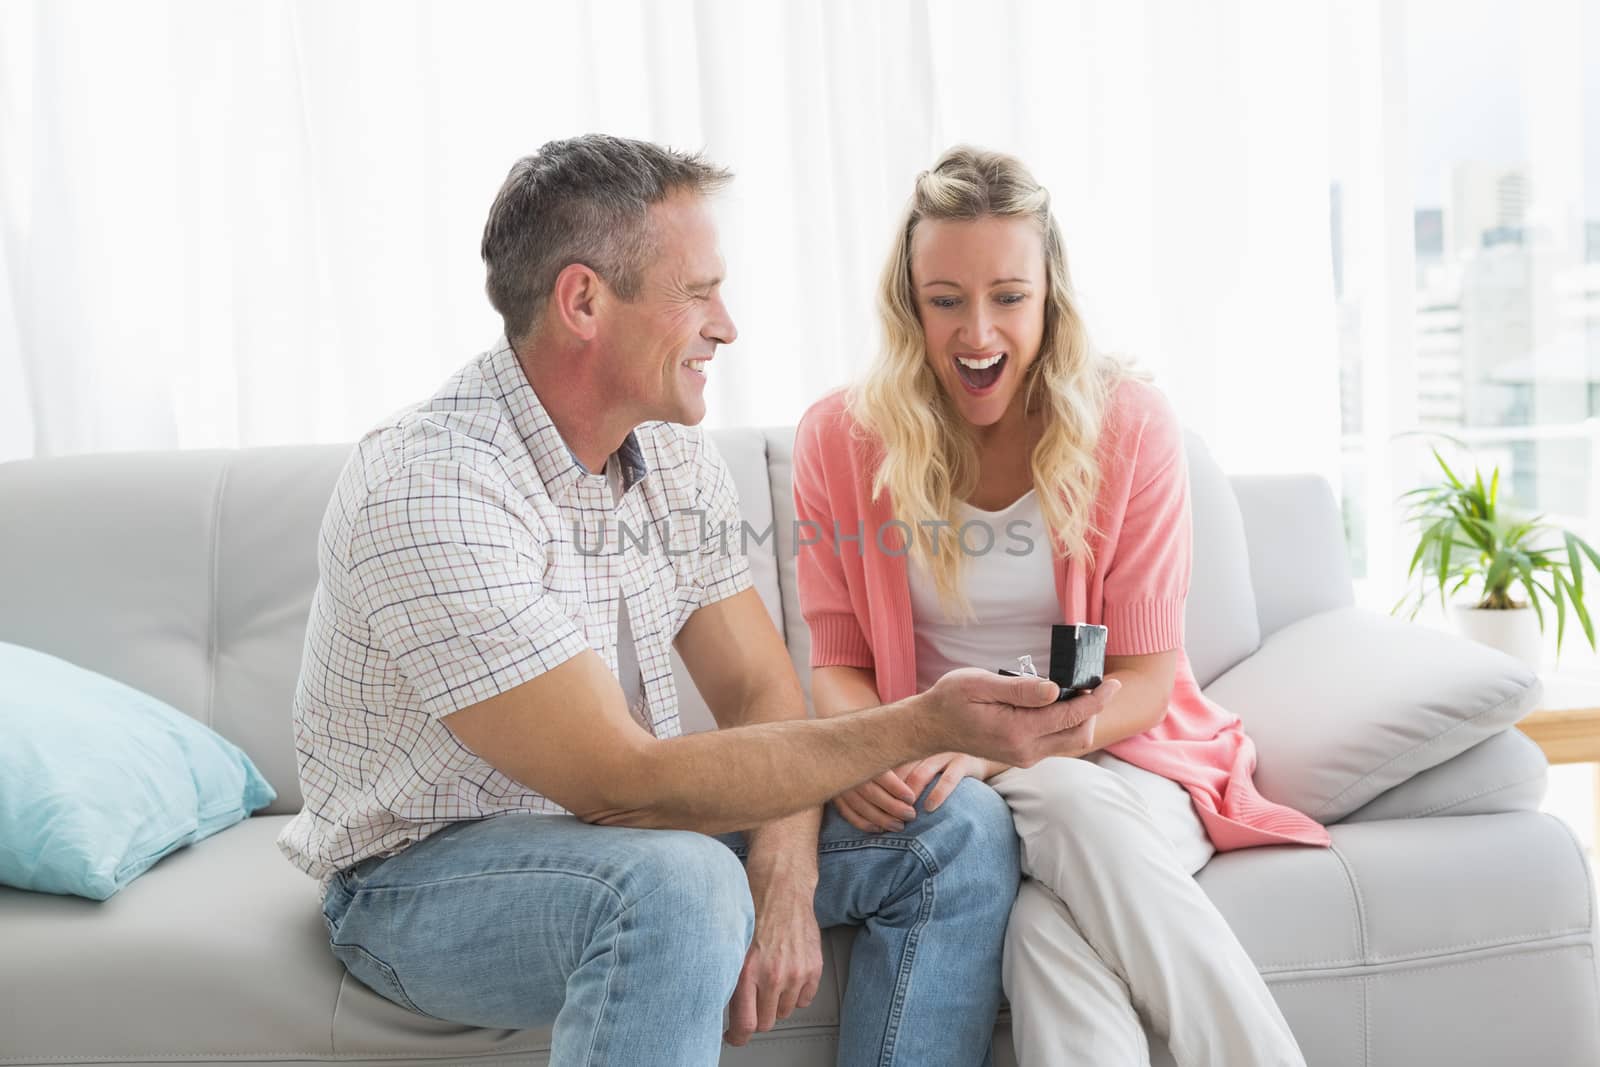 Man offering a romantic gift to his girlfriend at home in the living room